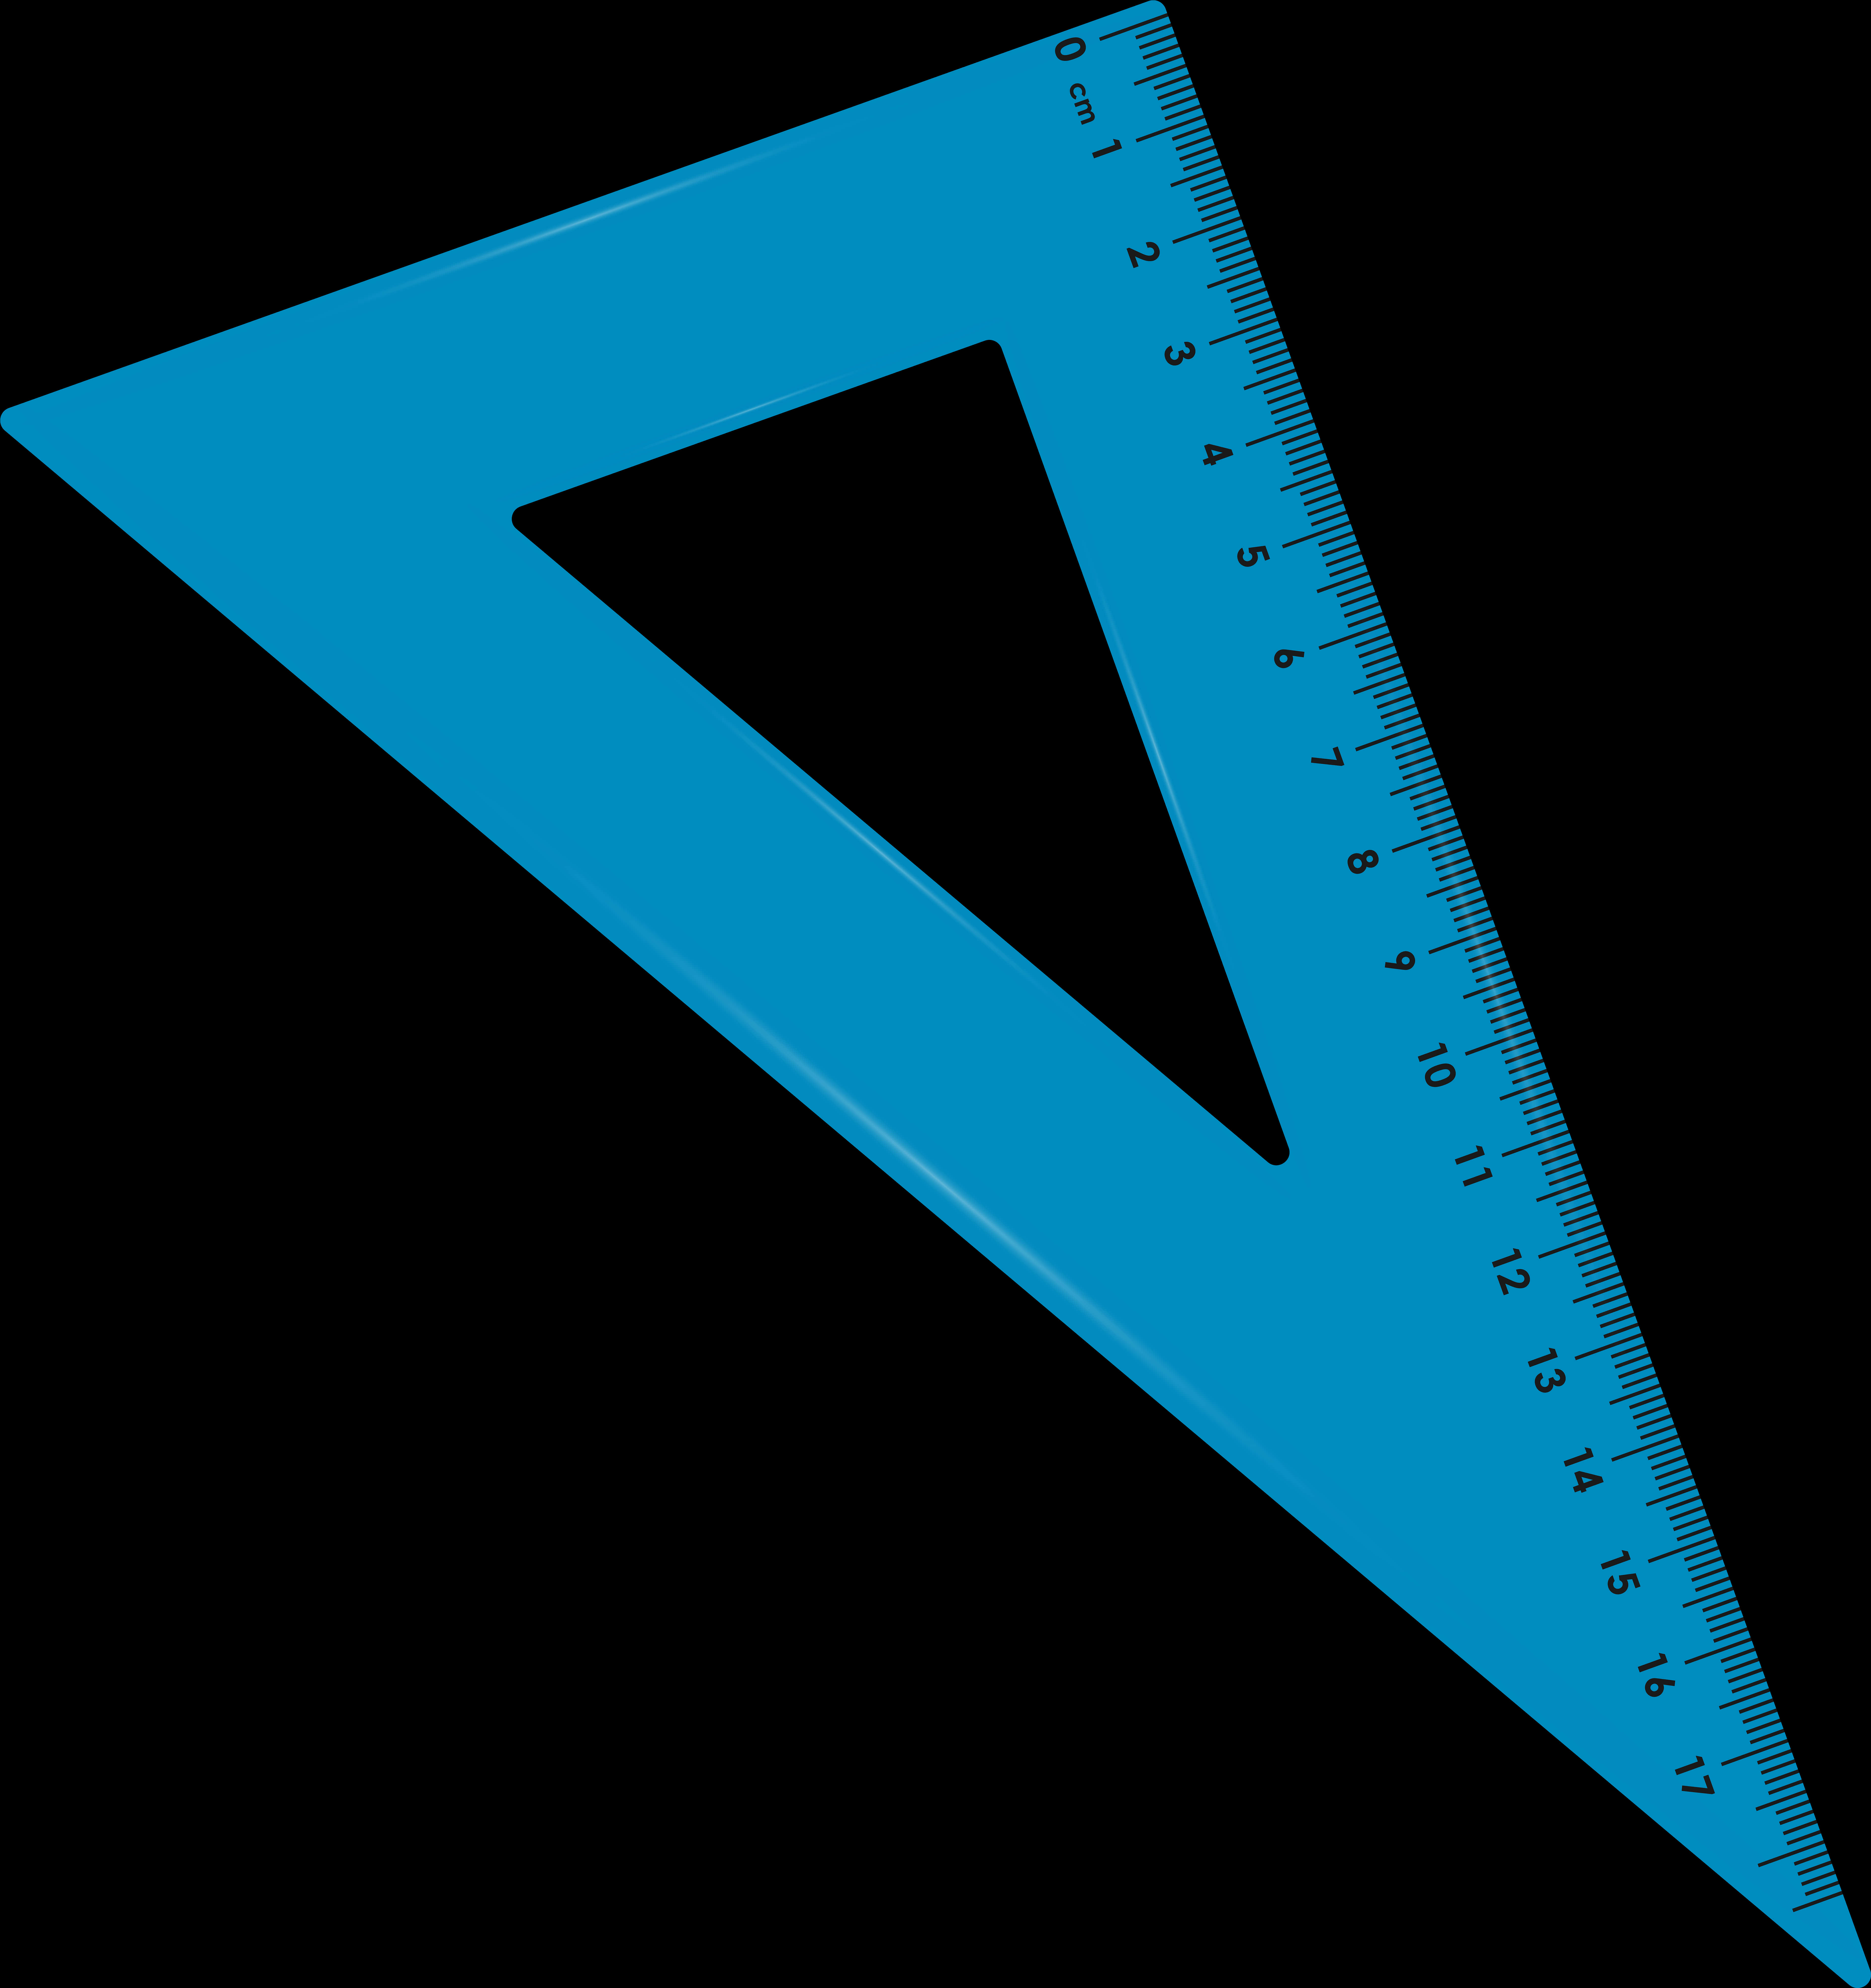 A Blue Triangle Ruler On A Black Background